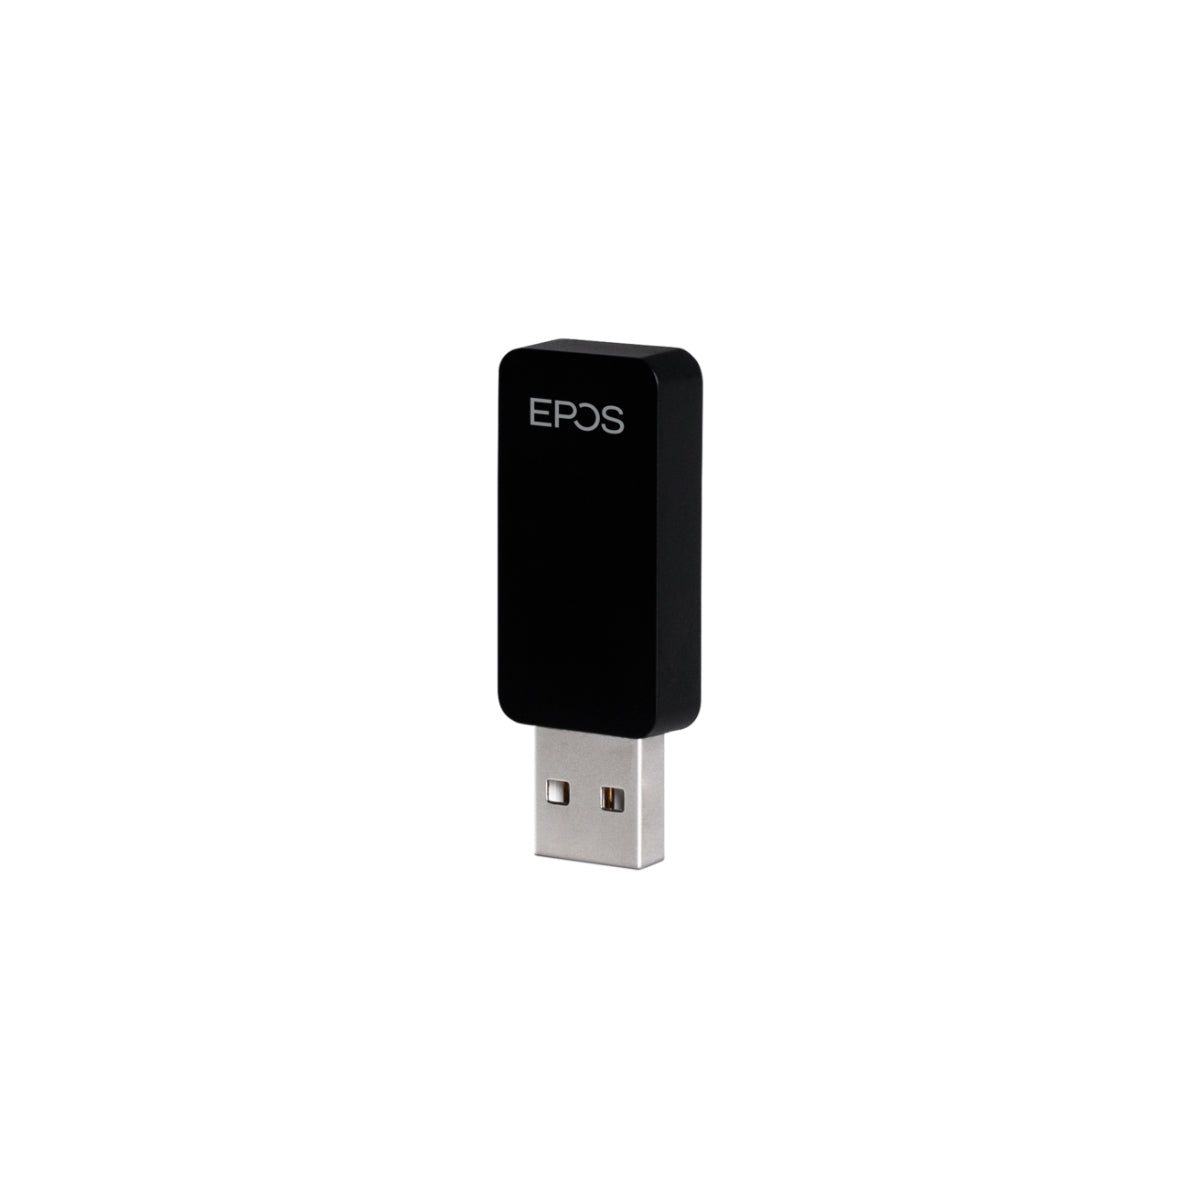 EPOS GSA 370 Dongle, Wireless USB Dongle for GSP 370